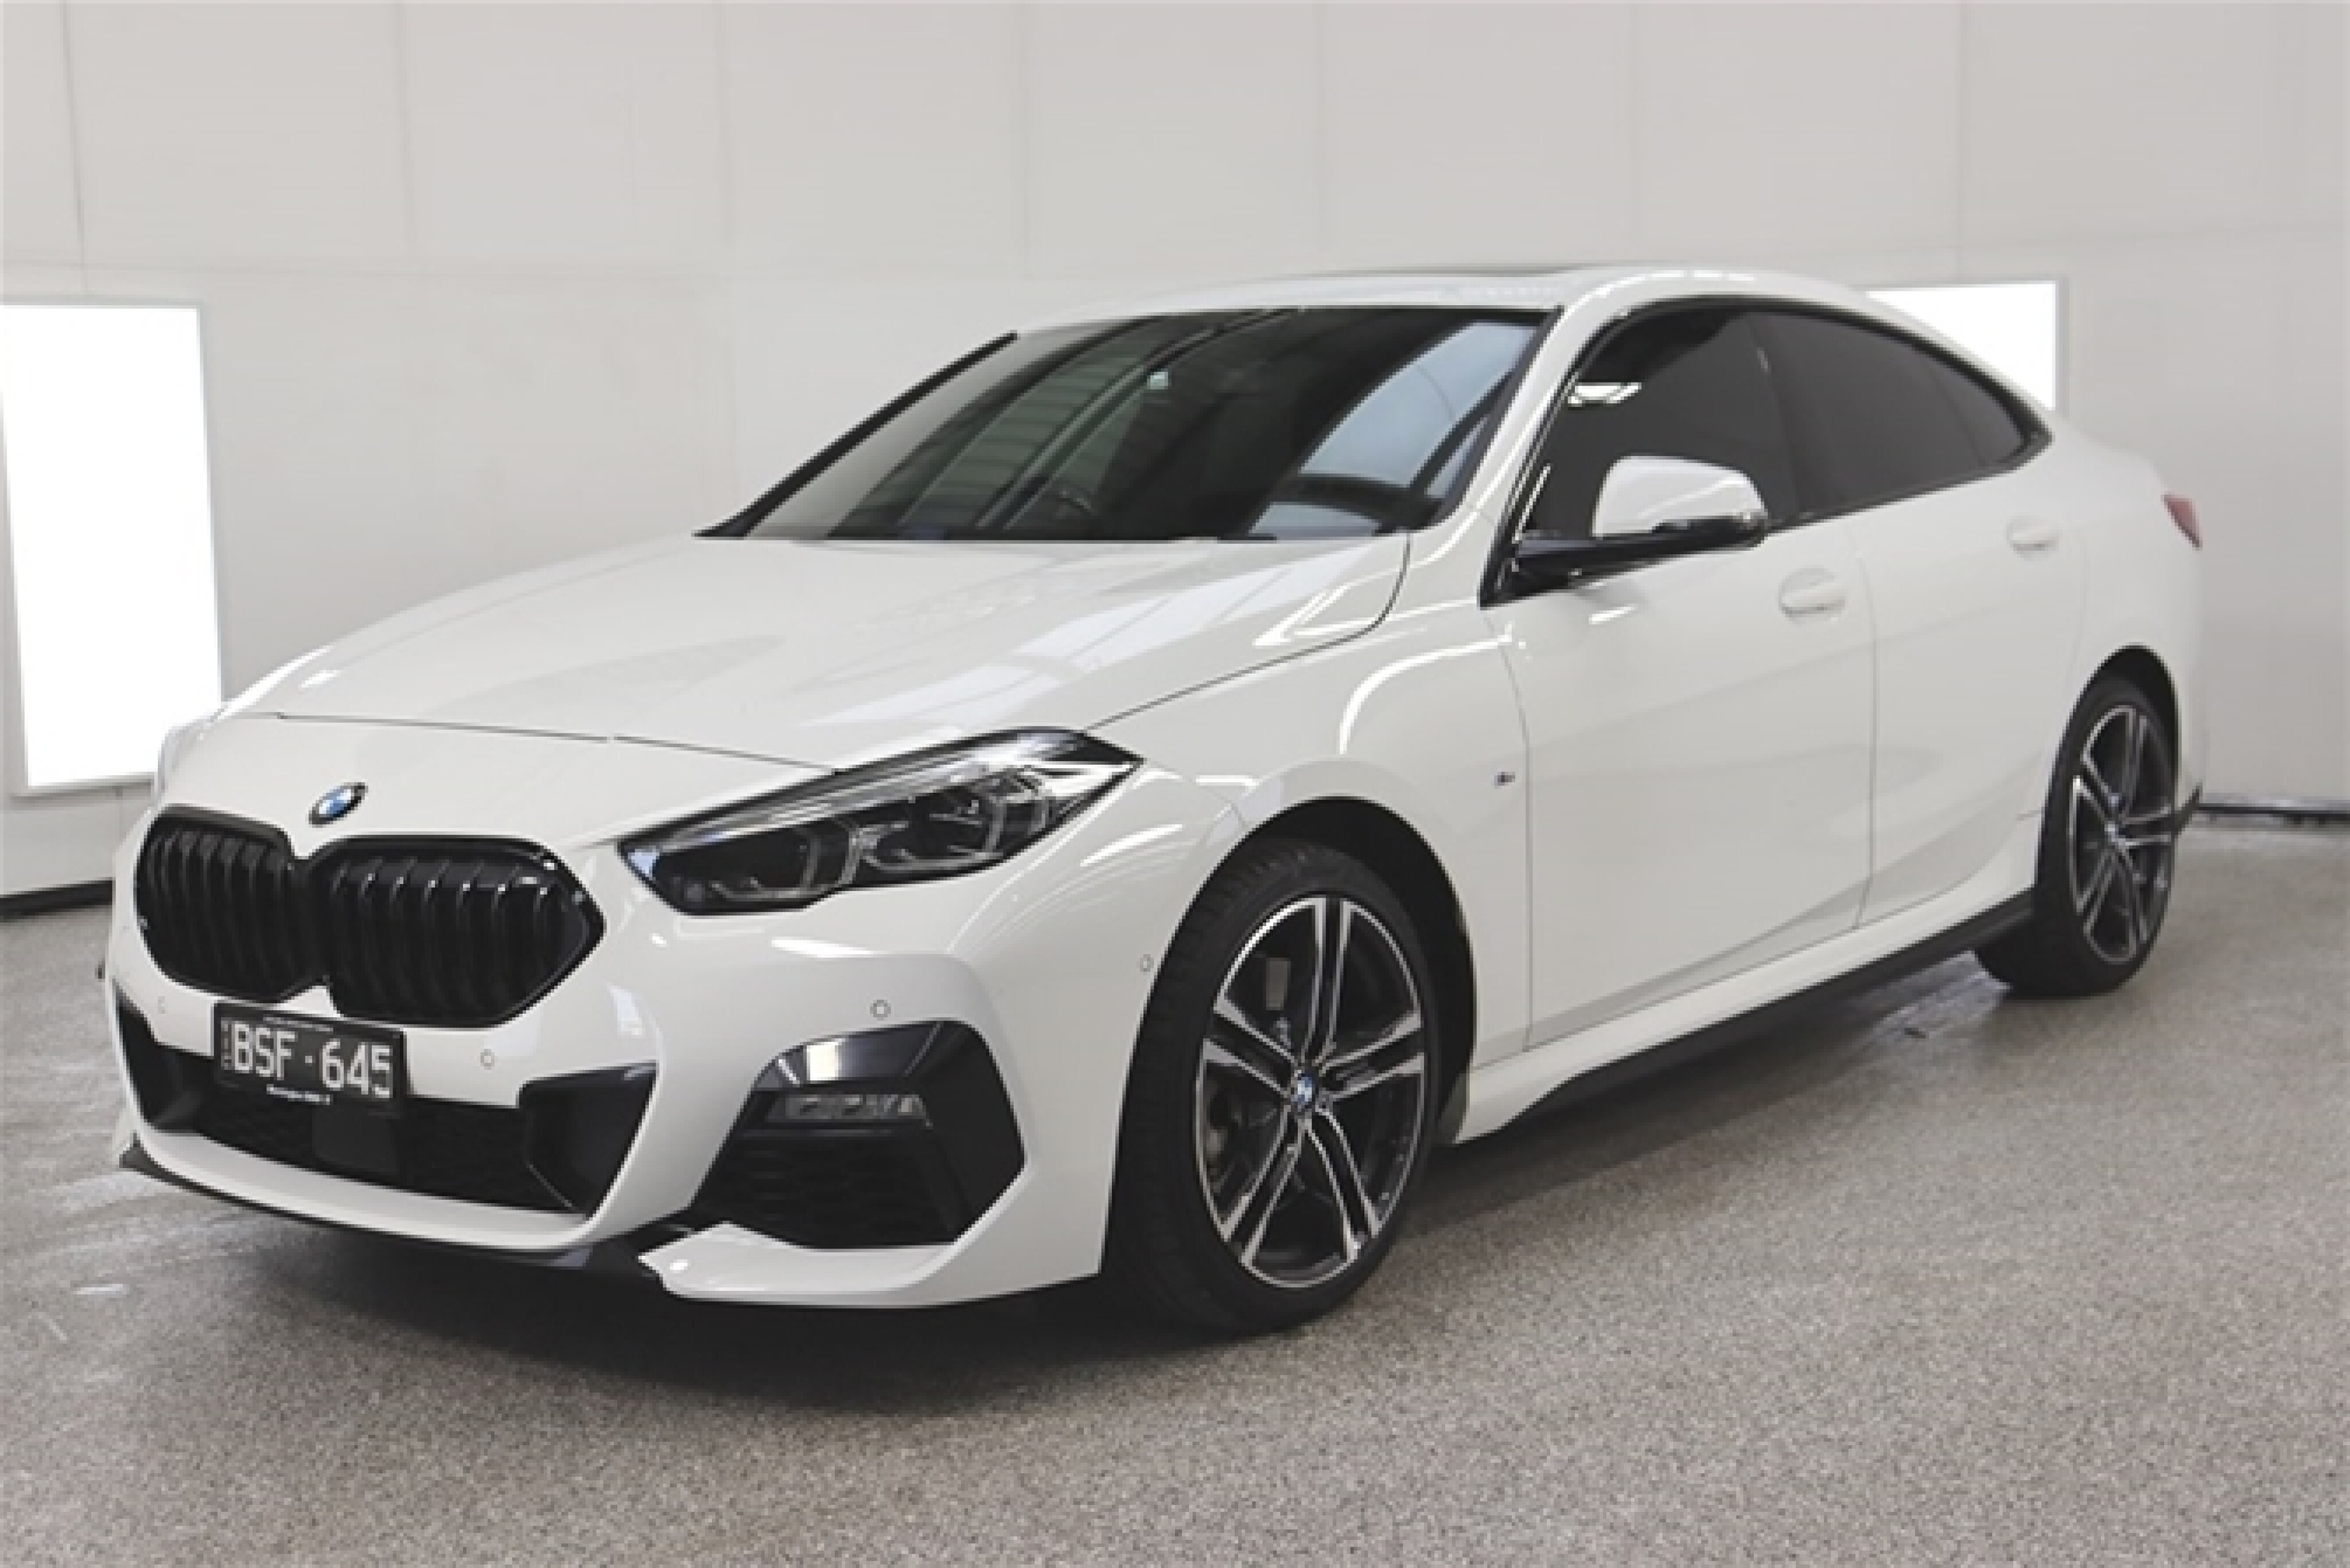 81ef1e35/2021 bmw 2 series 220i gran coupe f44 automatic grays auctions 1 jpg